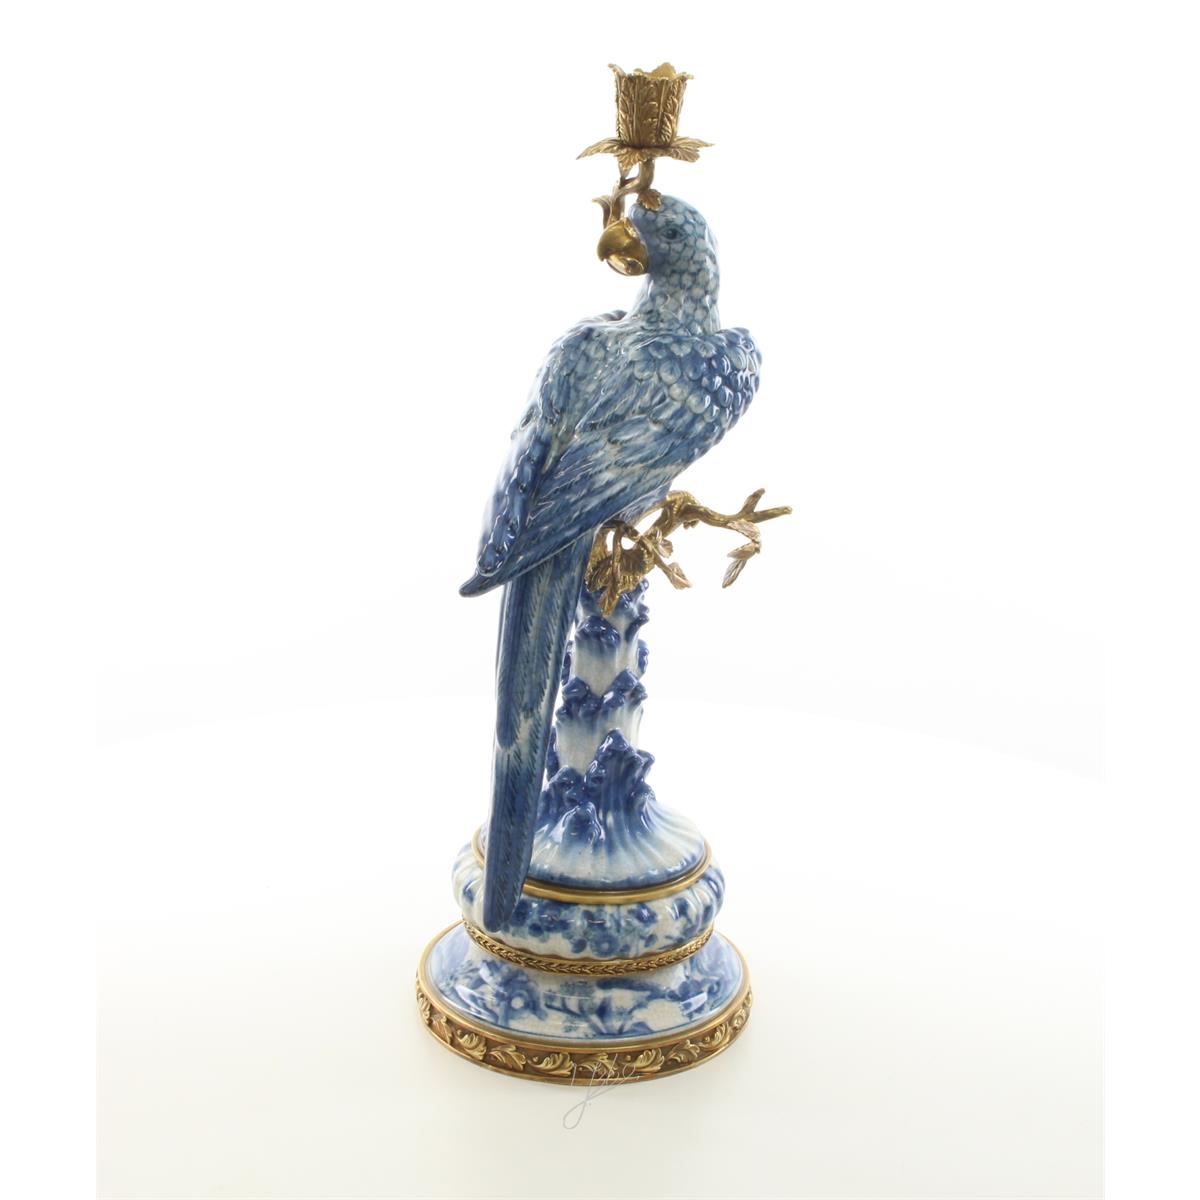 A BRONZE MOUNTED PORCELAIN PARROT CANDLE HOLDER